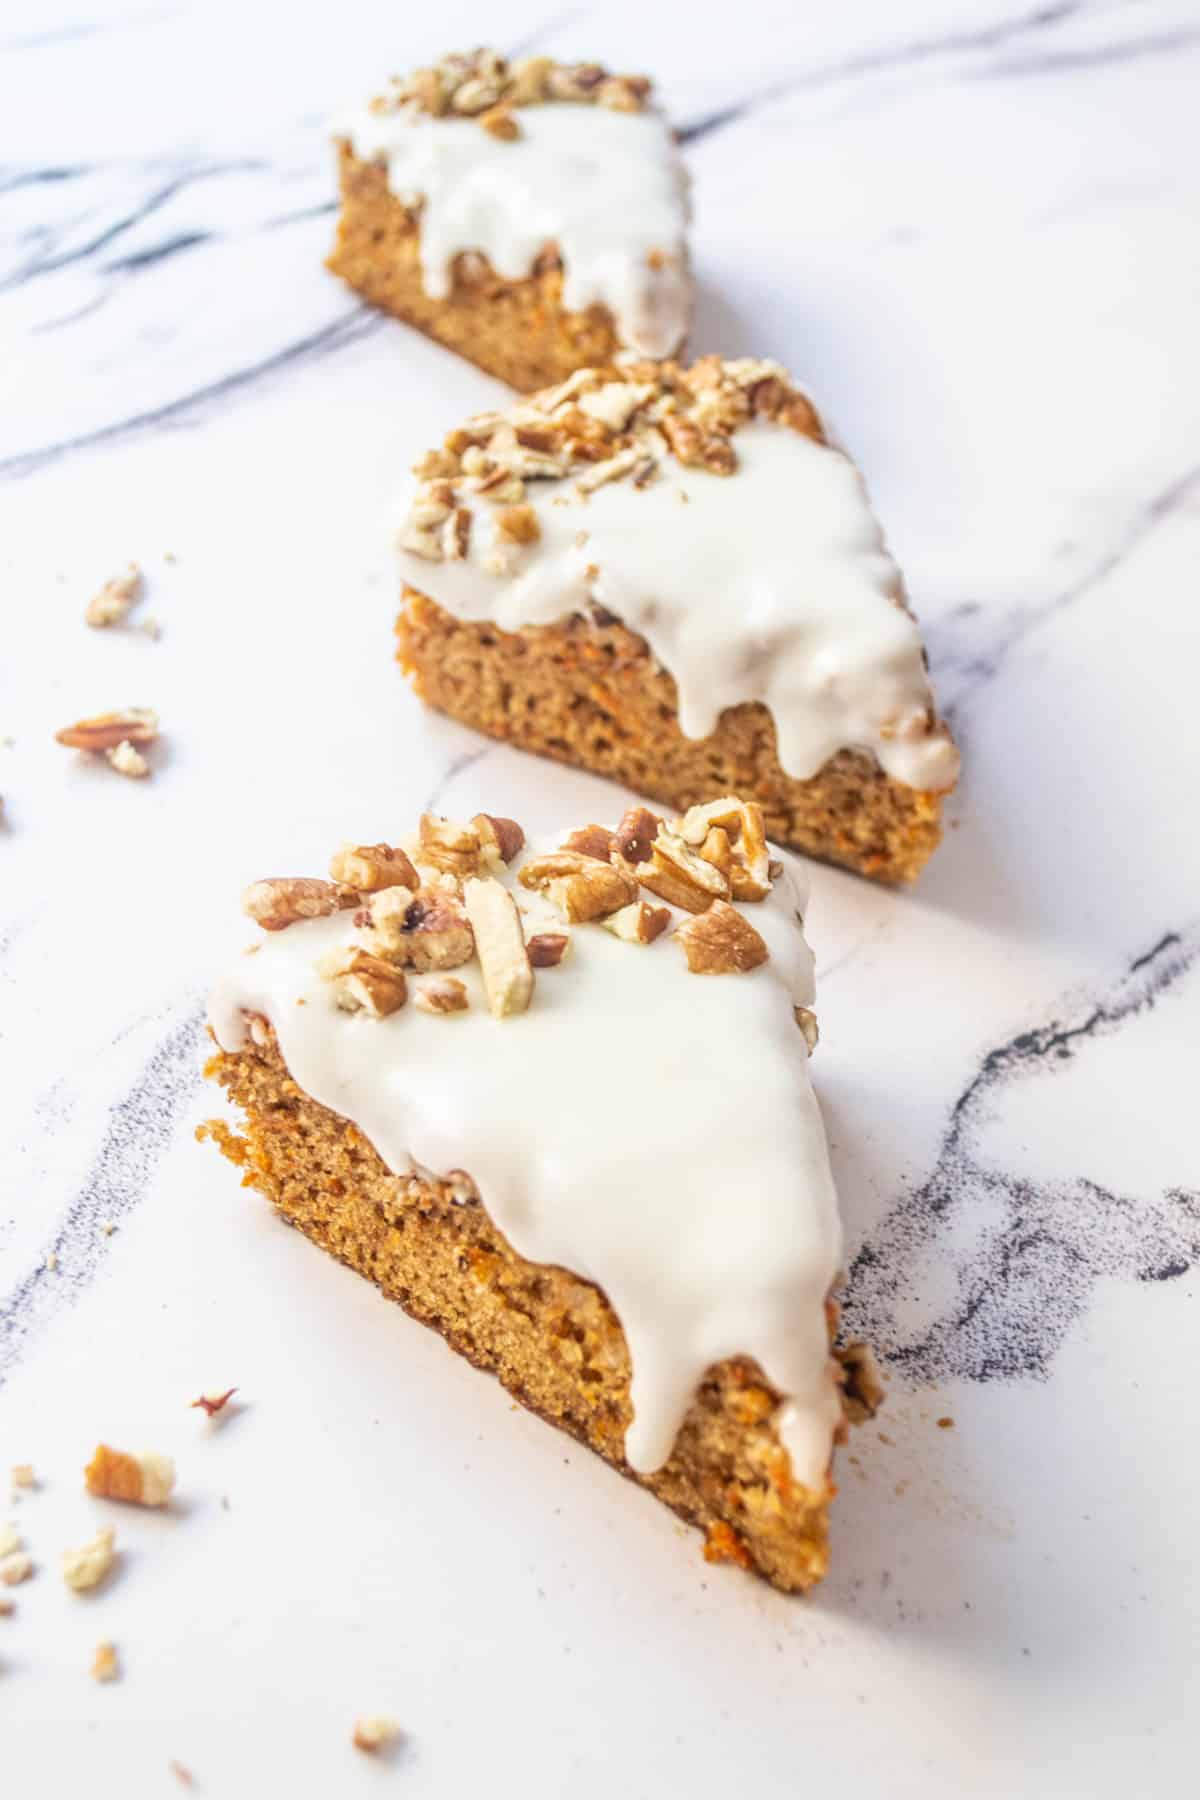 Several slices of dairy free carrot cake on a table.